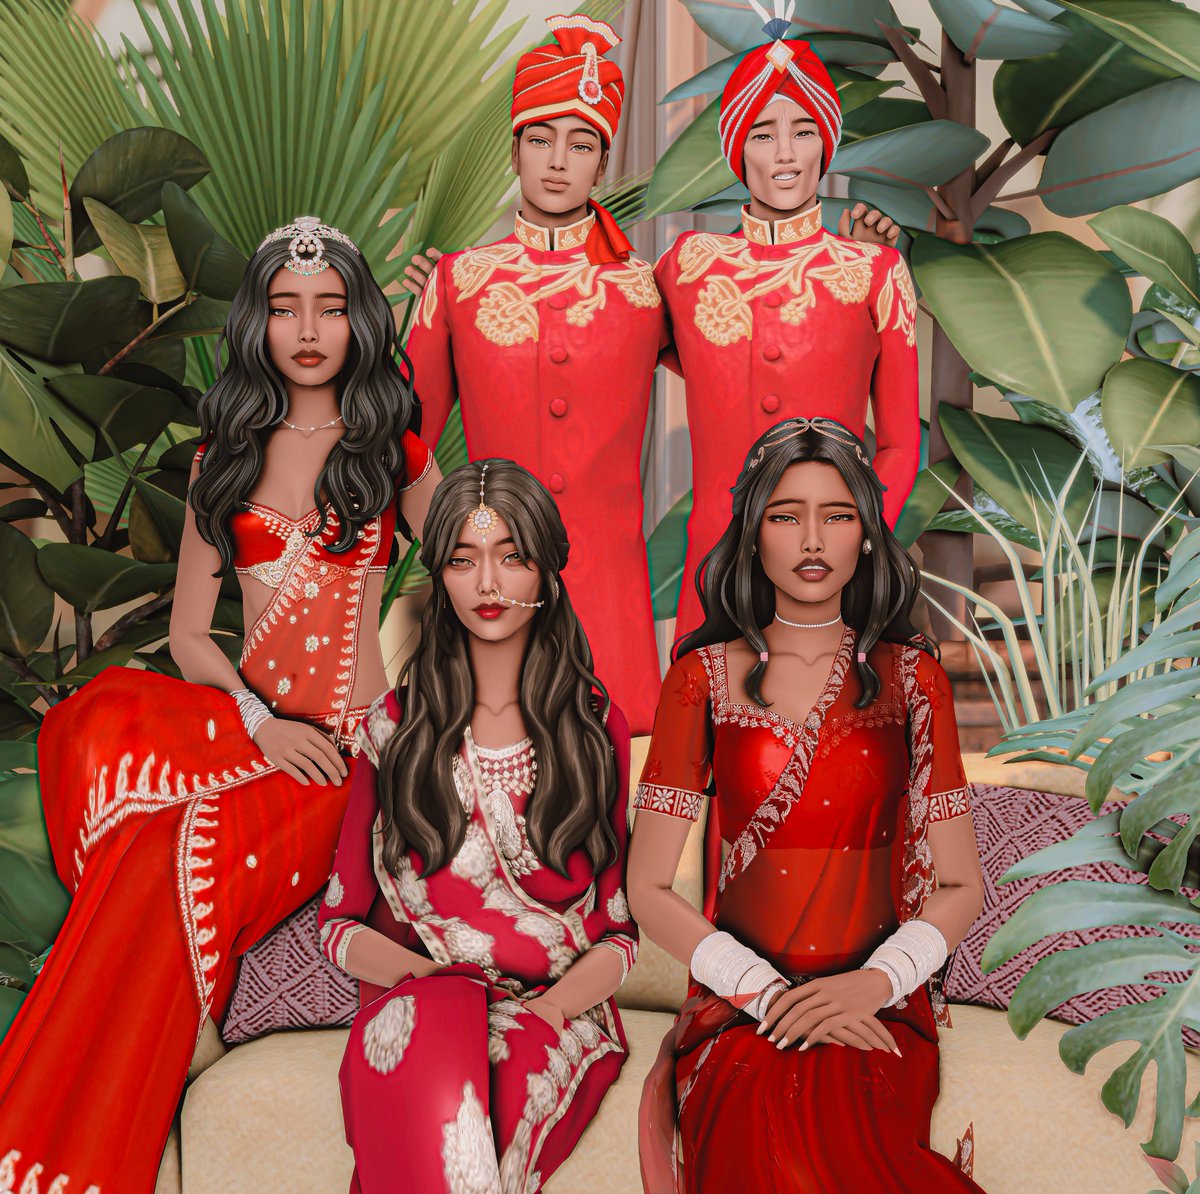 🇲🇦 🇮🇳 🇪🇬

#TheSims4 #ShowUsYourSims